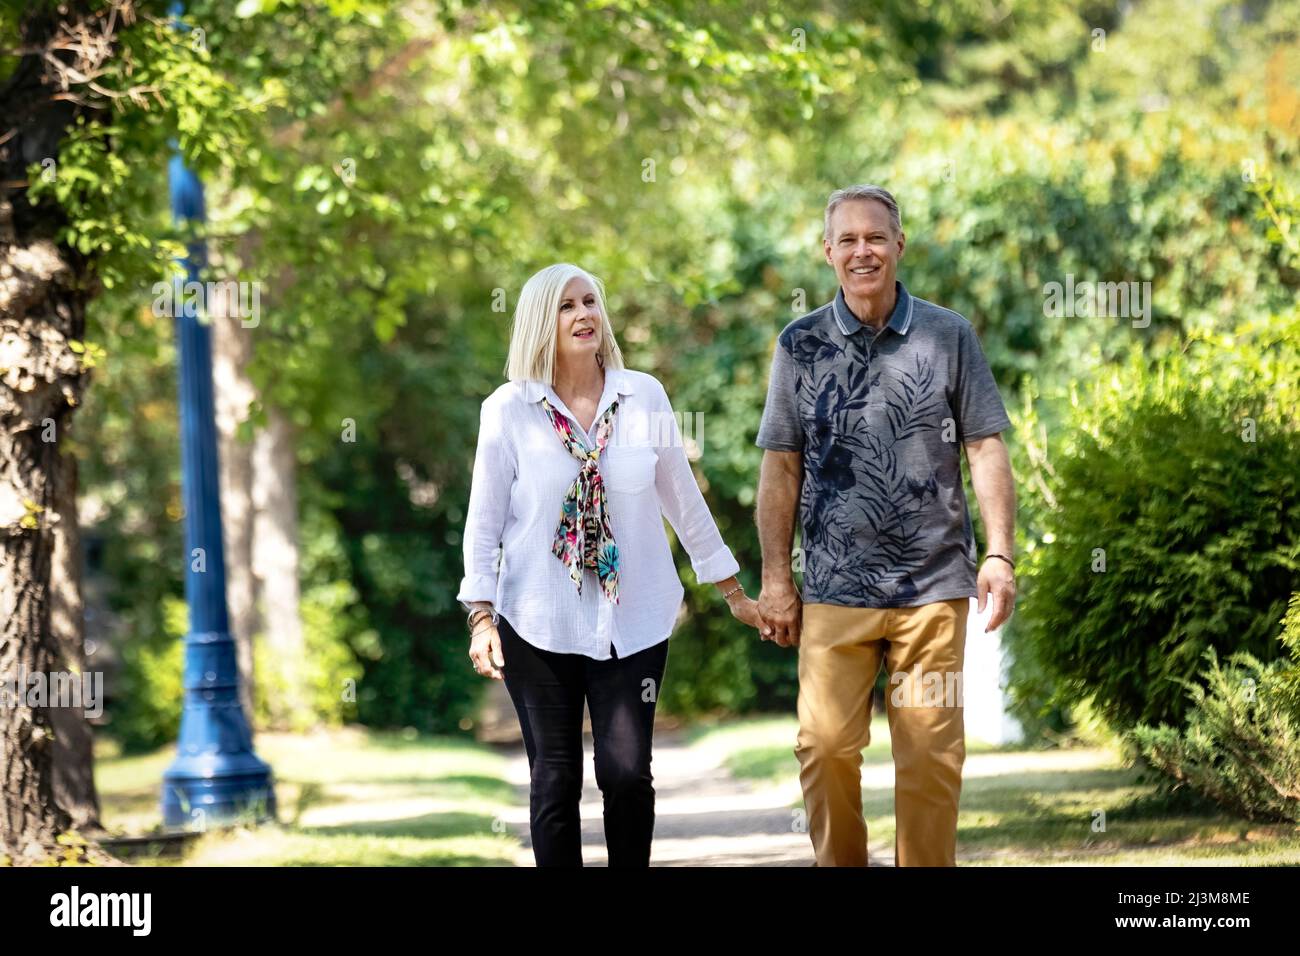 Mature couple holding hands while walking outdoors on a park trail; Edmonton, Alberta, Canada Stock Photo